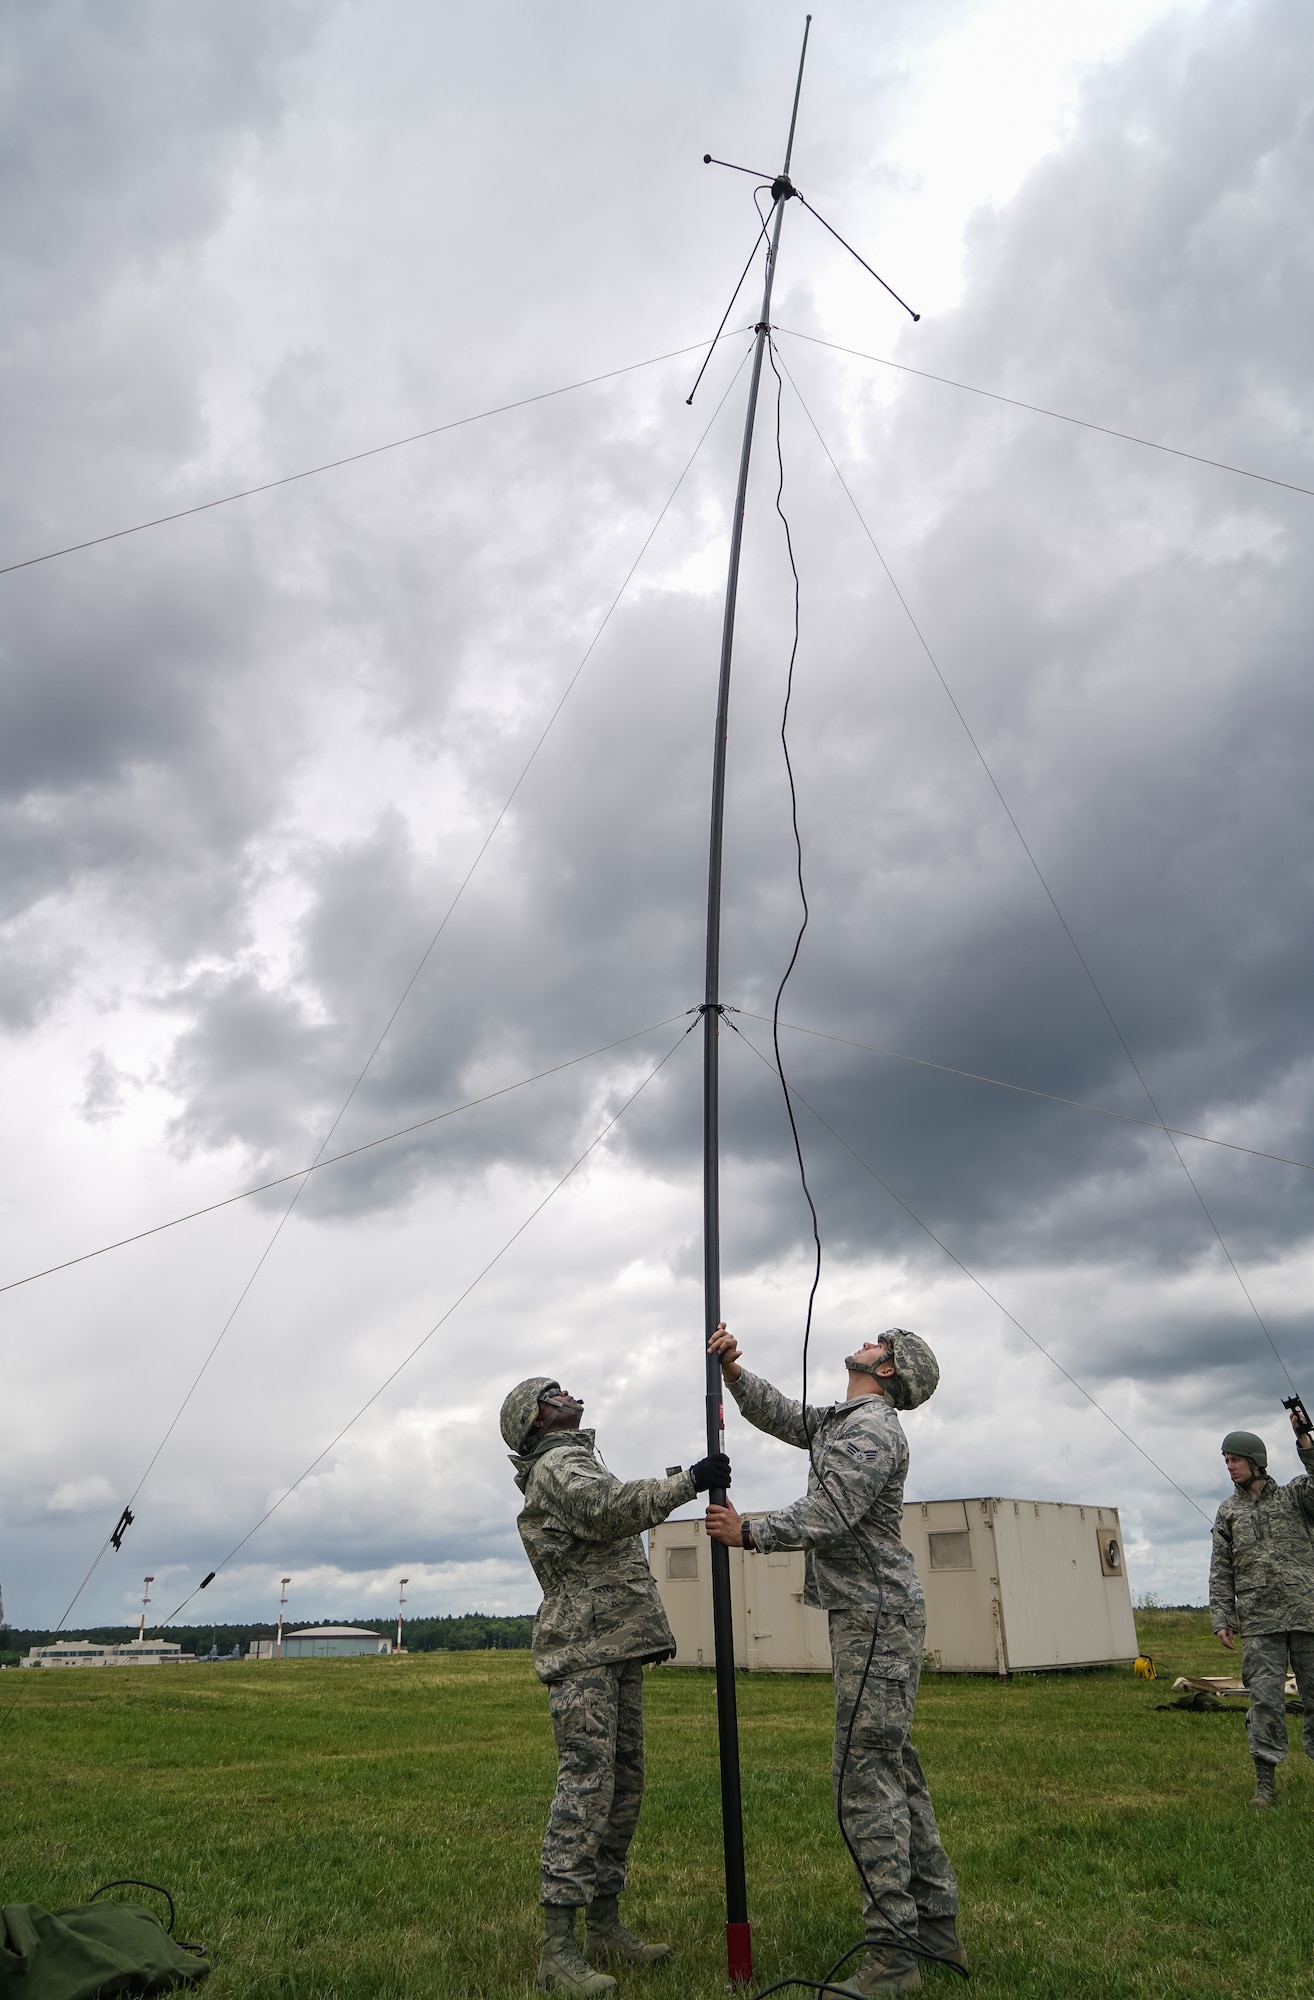 U.S. Air Force Master Sgt. Columbus Cook, an operations technician with the 116th Air Control Wing (ACW), 116th Civil Engineer Squadron (CES), Georgia Air National Guard (GANG), and Senior Airman John Rosales, with the 786th CES, Ramstein Air Base, Germany, raise a tactical communications antenna during United States Air Forces Europe (USAFE) Silver Flag 2017 at Ramstein Air Base, Germany, June 7, 2017. A team 41 GANG civil engineers from the 116th ACW are participating in USAFE Silver Flag 2017.